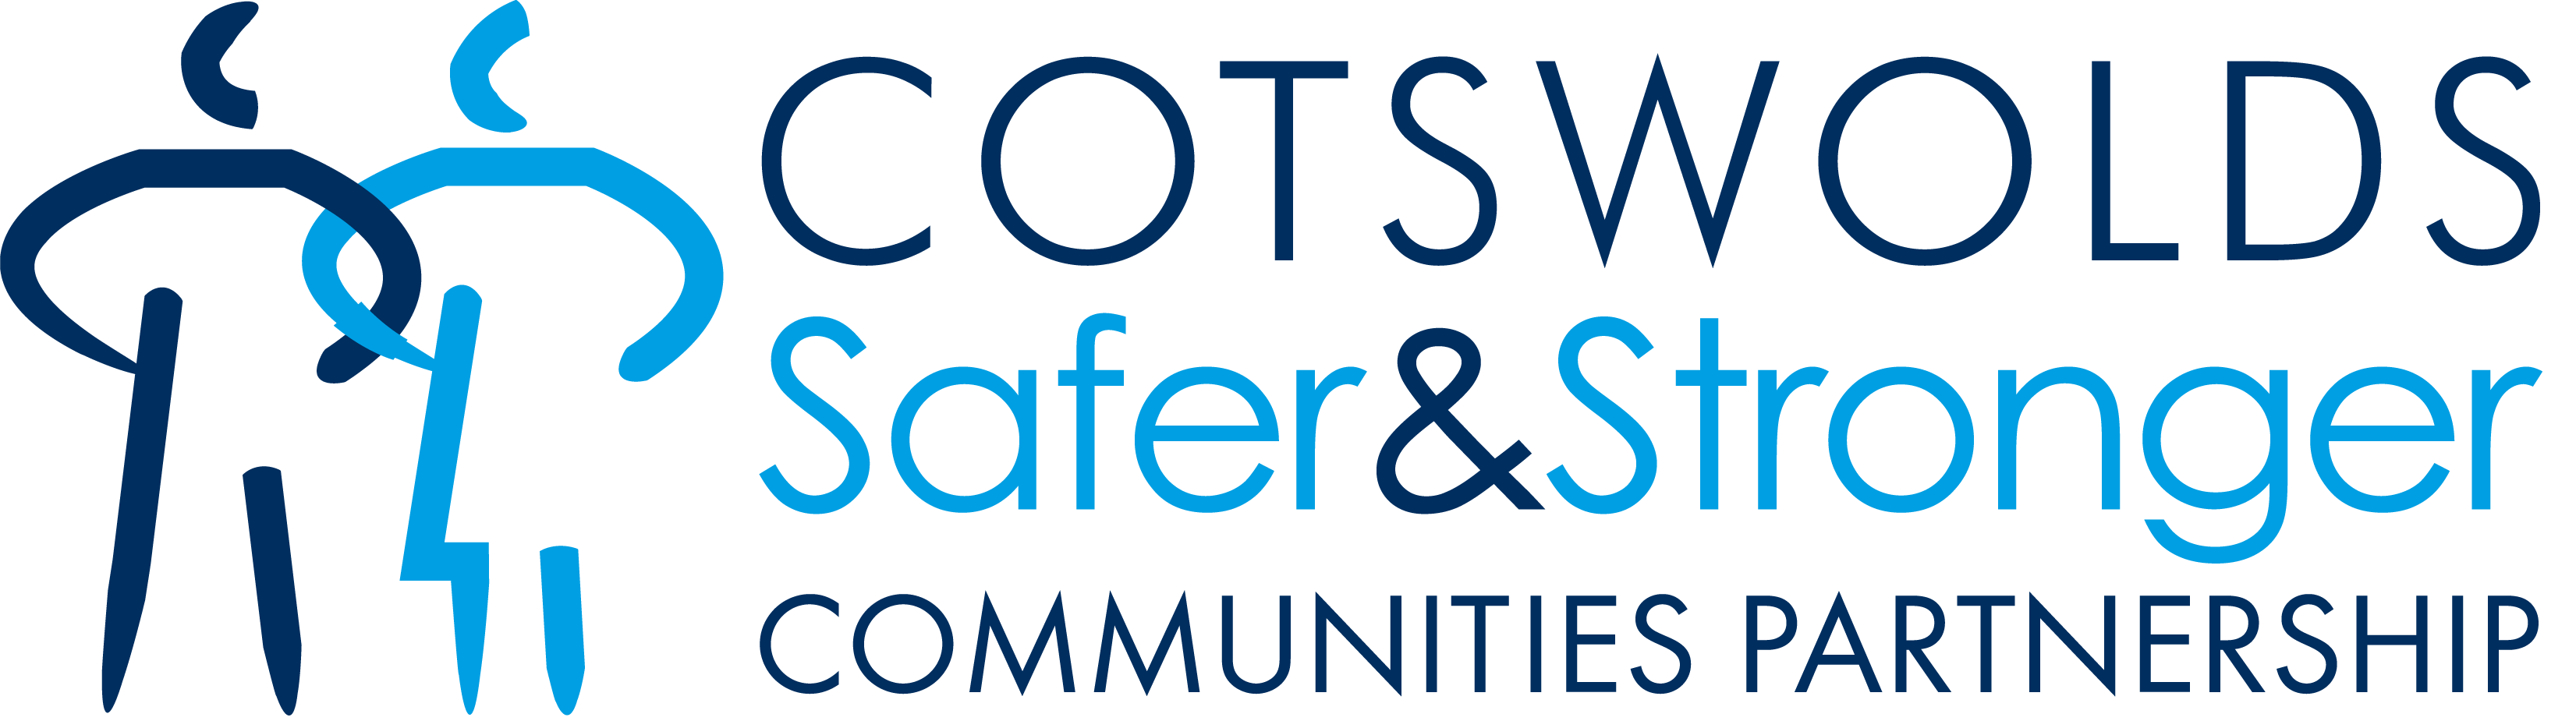 Cotswolds safer and stronger communities partnership logo